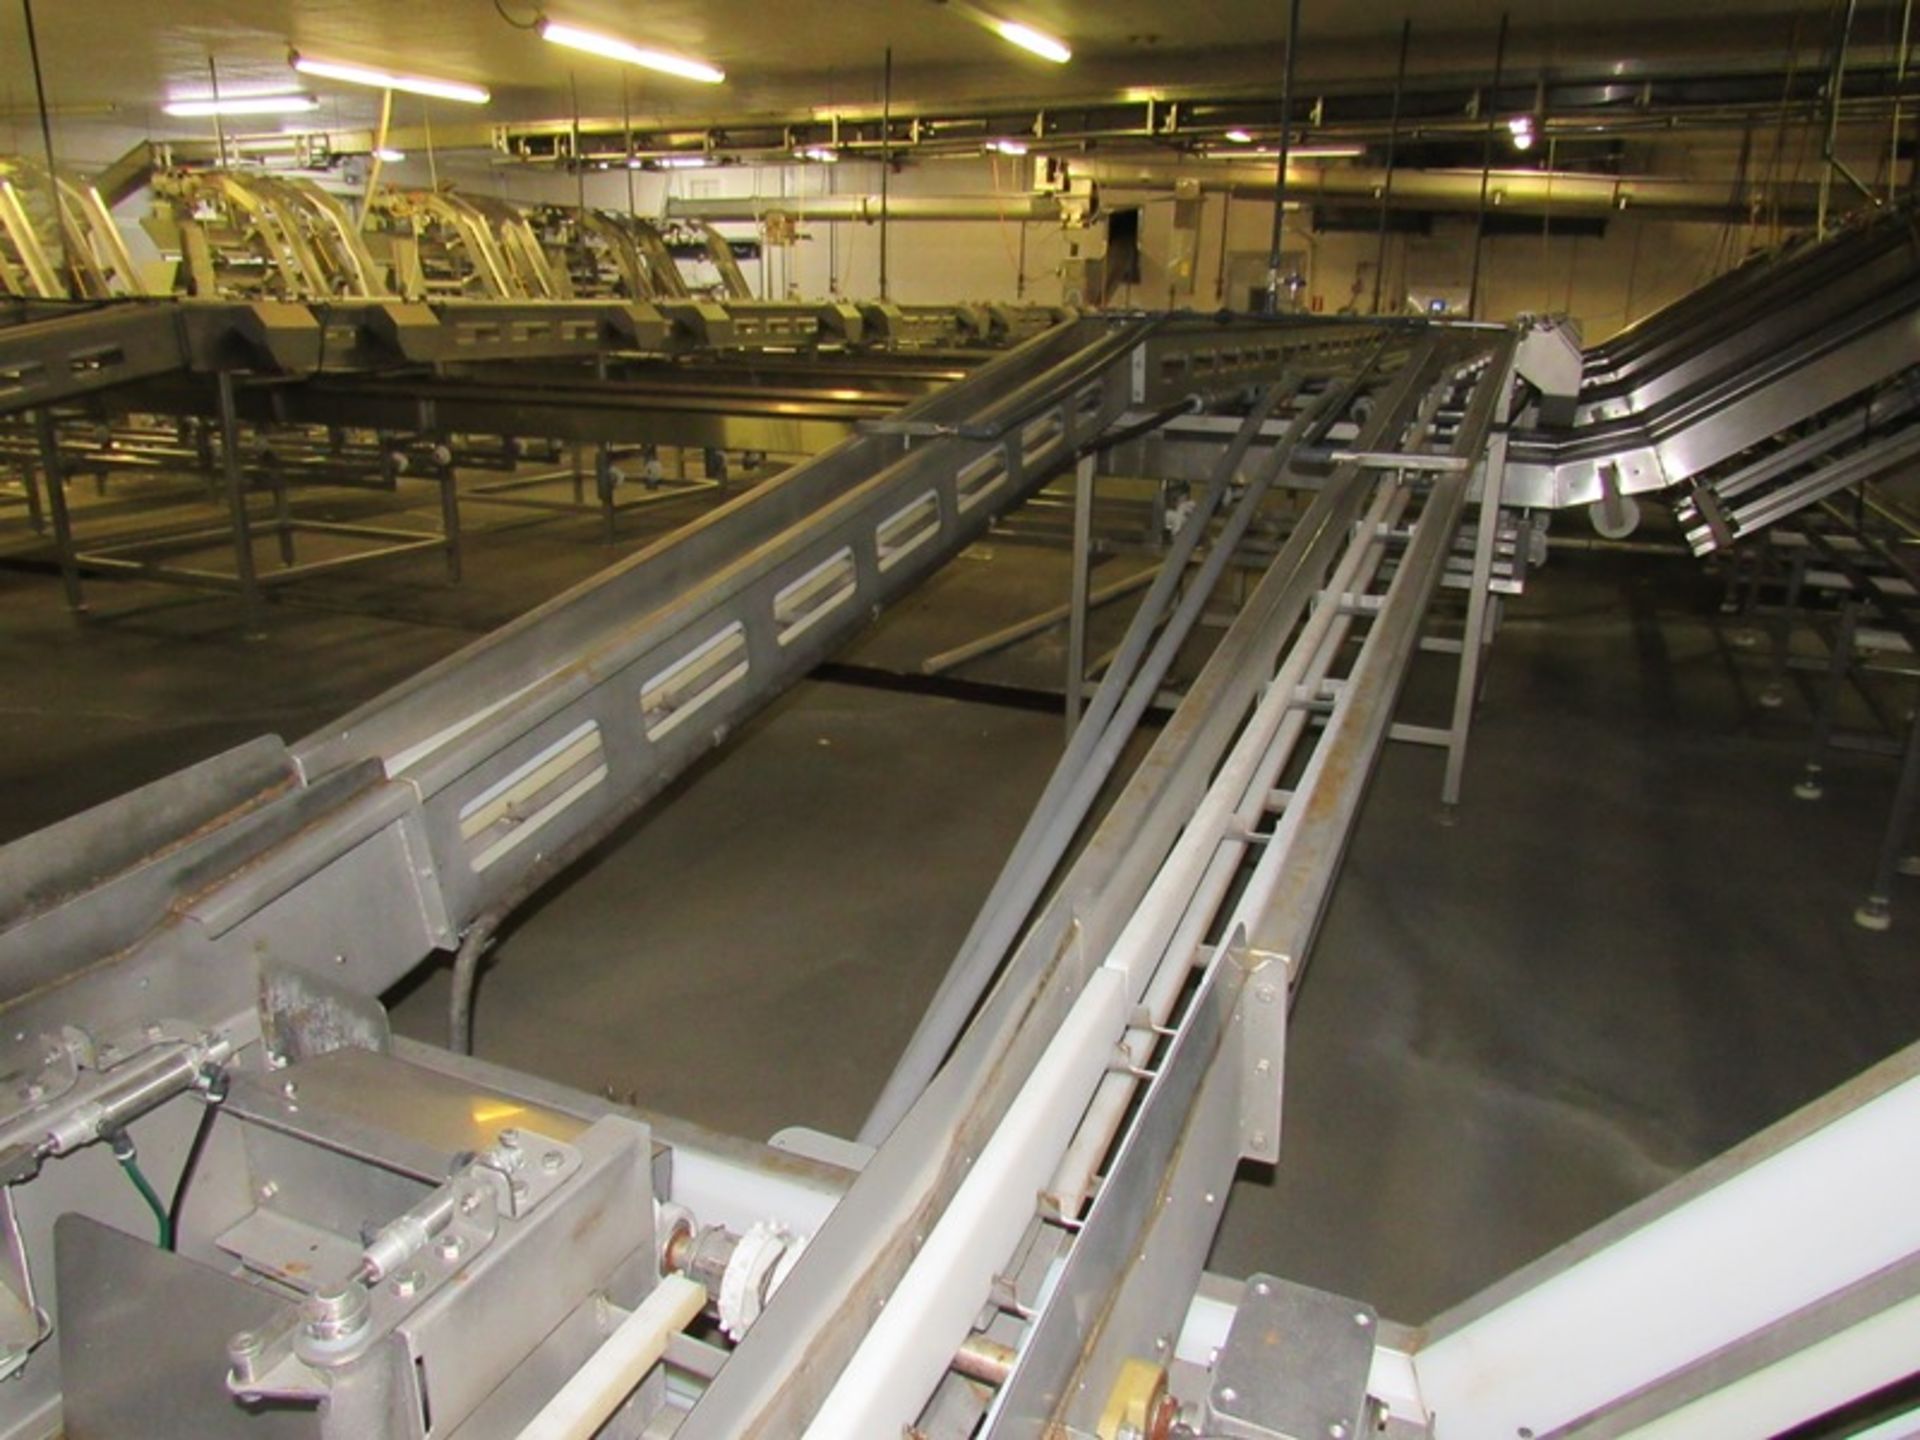 C.A.T. Stainless Steel Grading Line, dual lanes, 10 positions per lane, pneumatic drop chutes, - Image 13 of 18